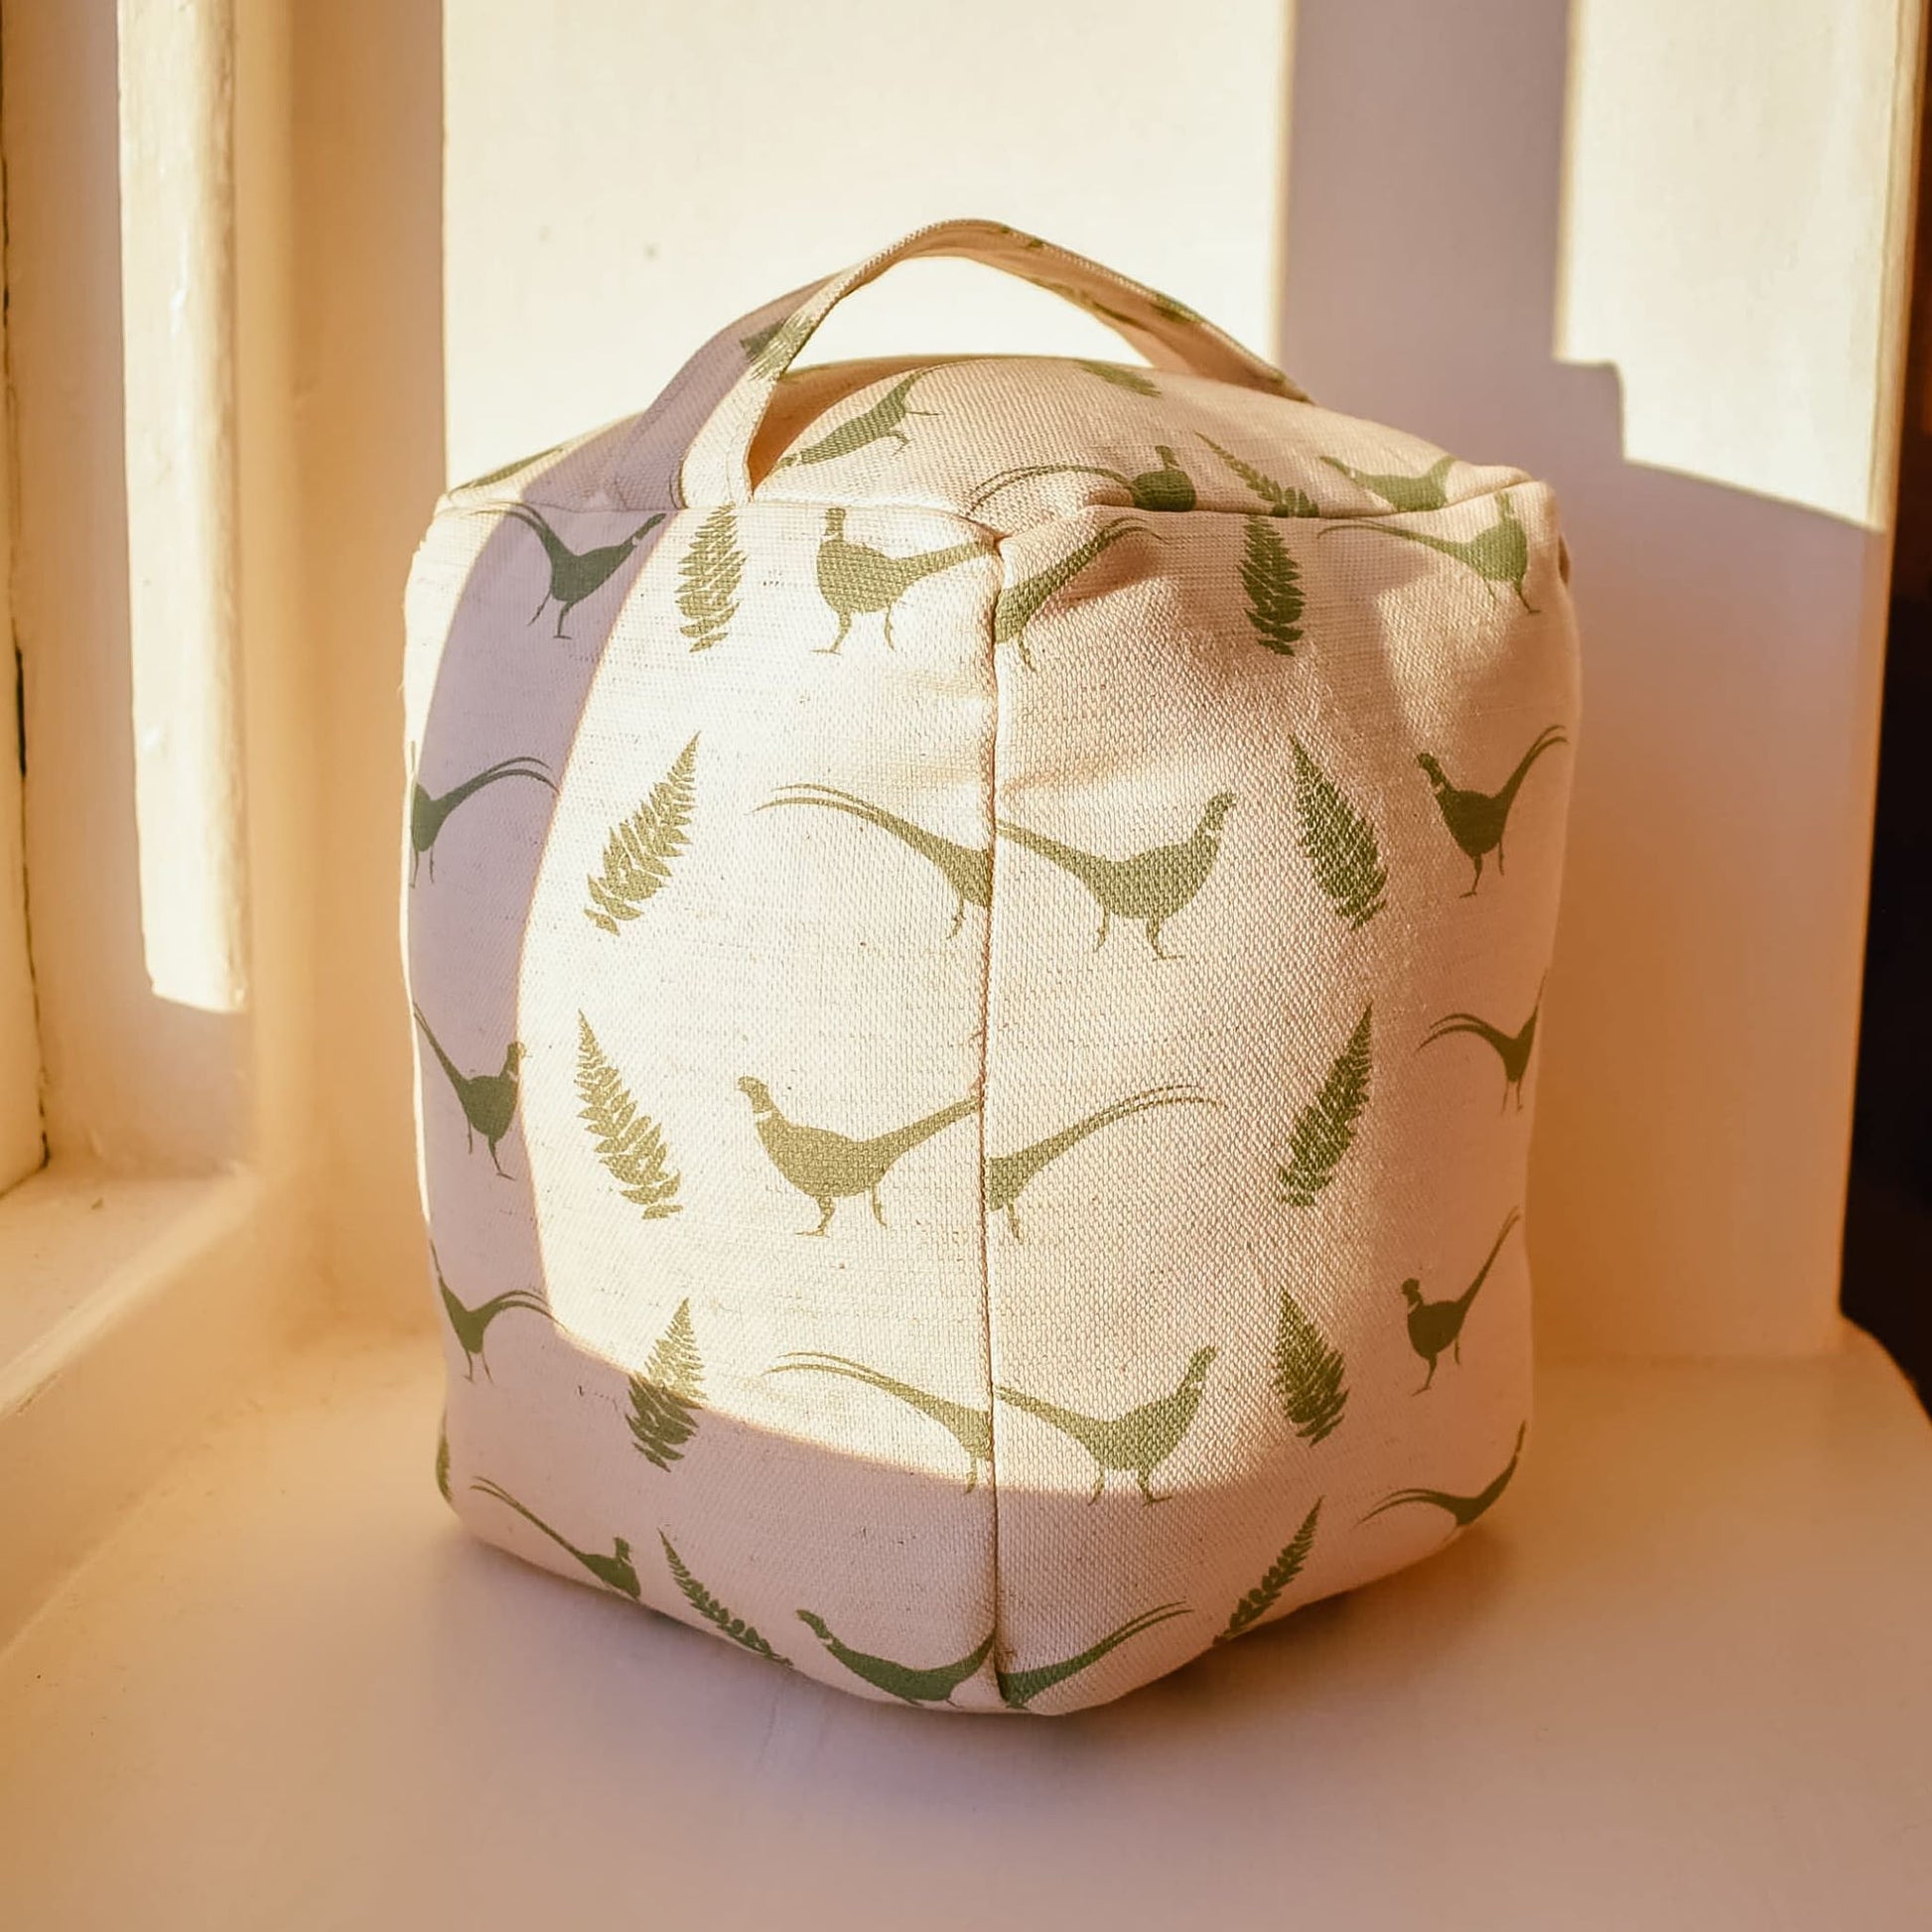 Doorstops inspired by and handmade in Yorkshire by F&B - Pheasant and Fern print fabric designed by F&B